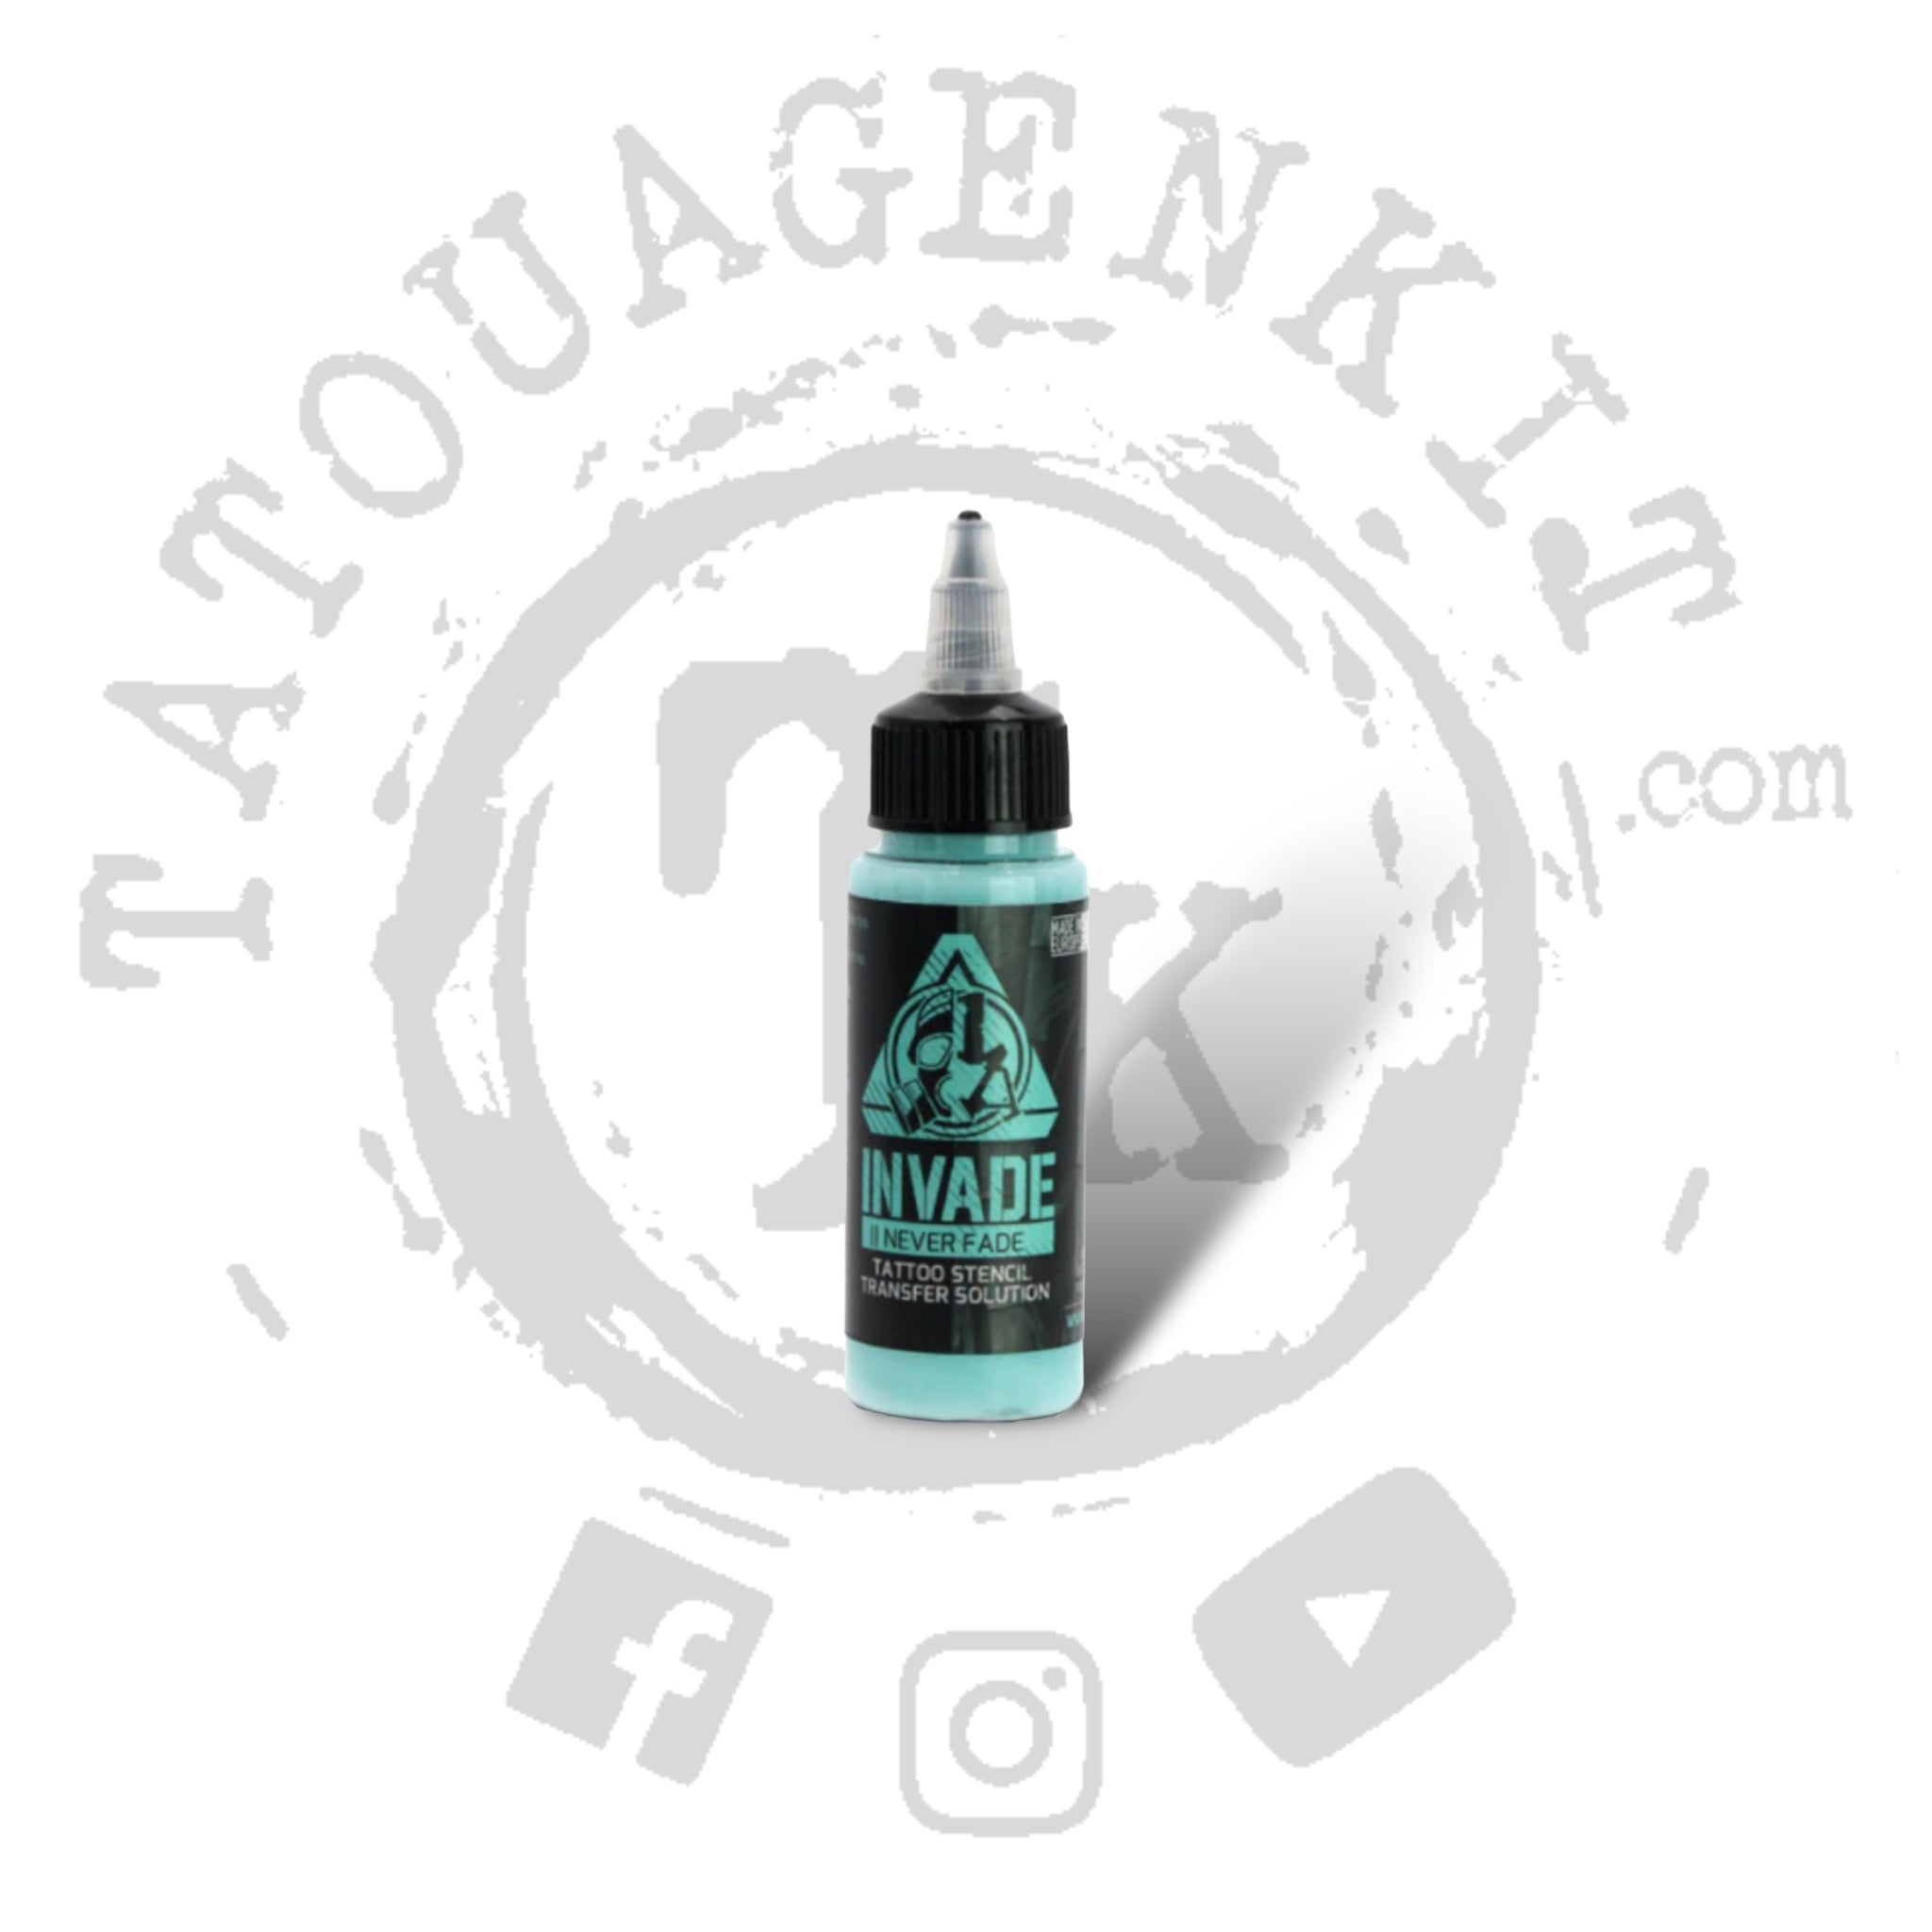 Stencil The Inked Army - Invade - 50ml